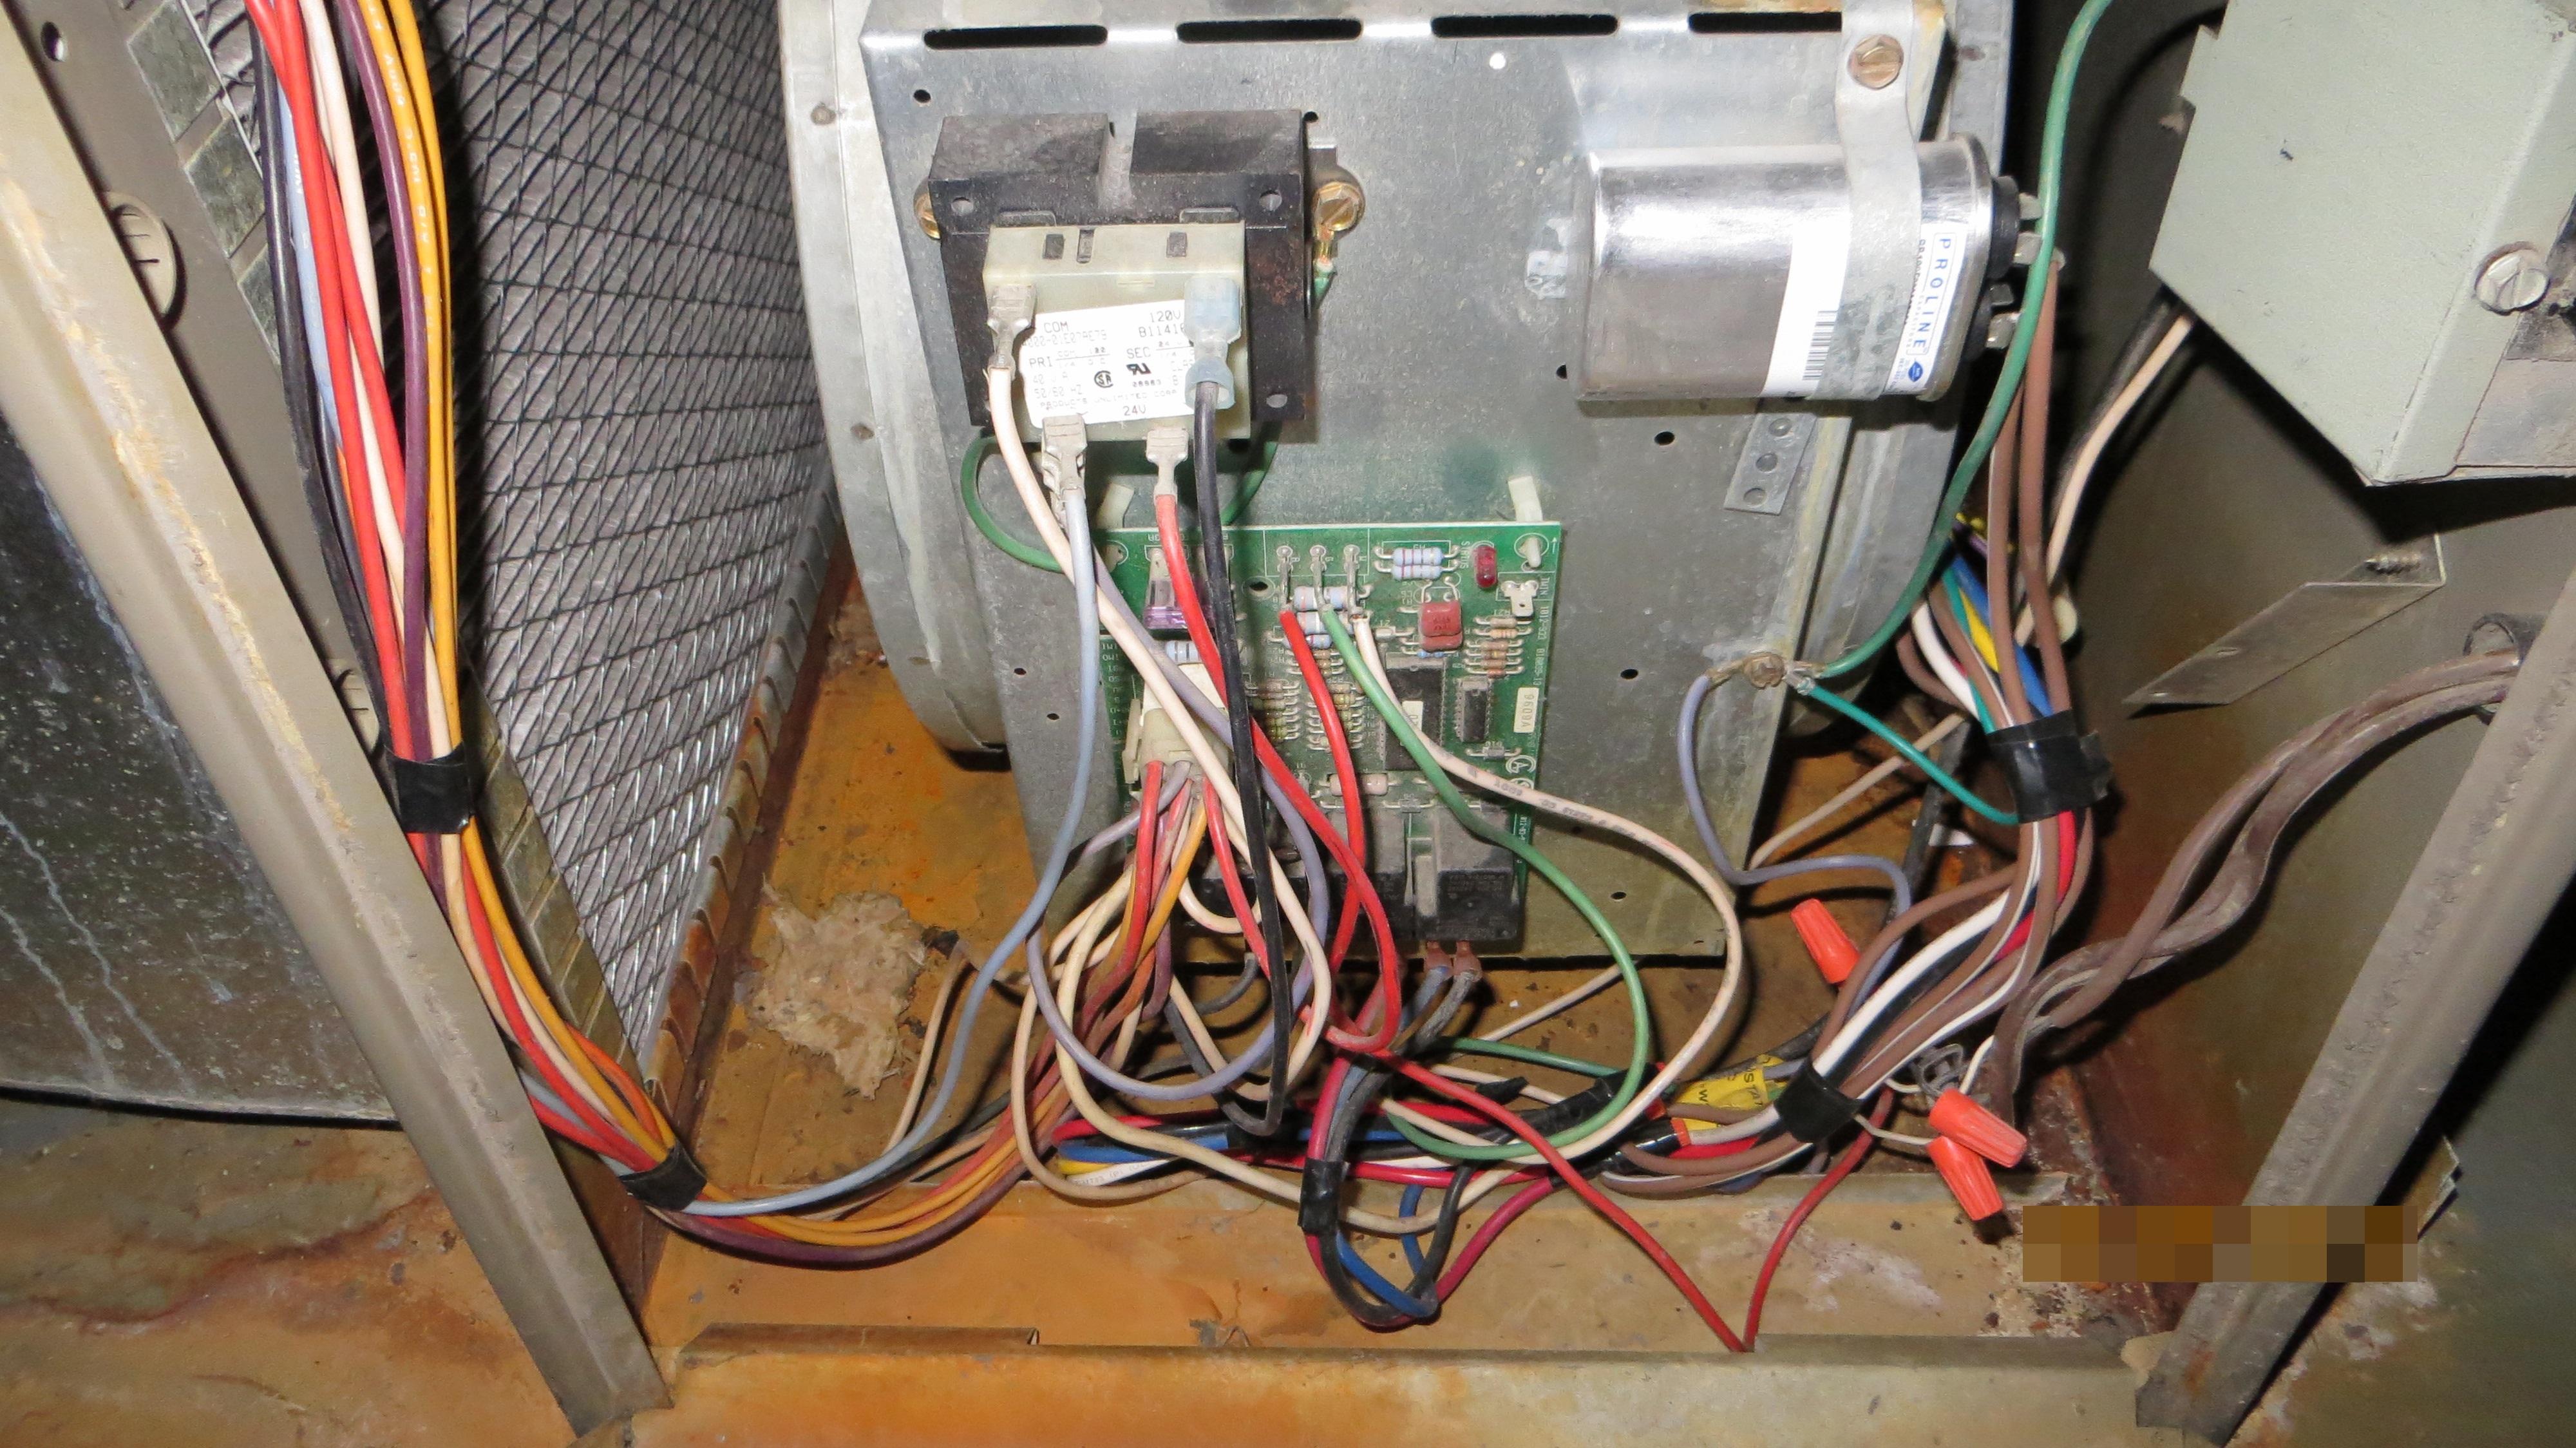 Water damages in furnace control panel